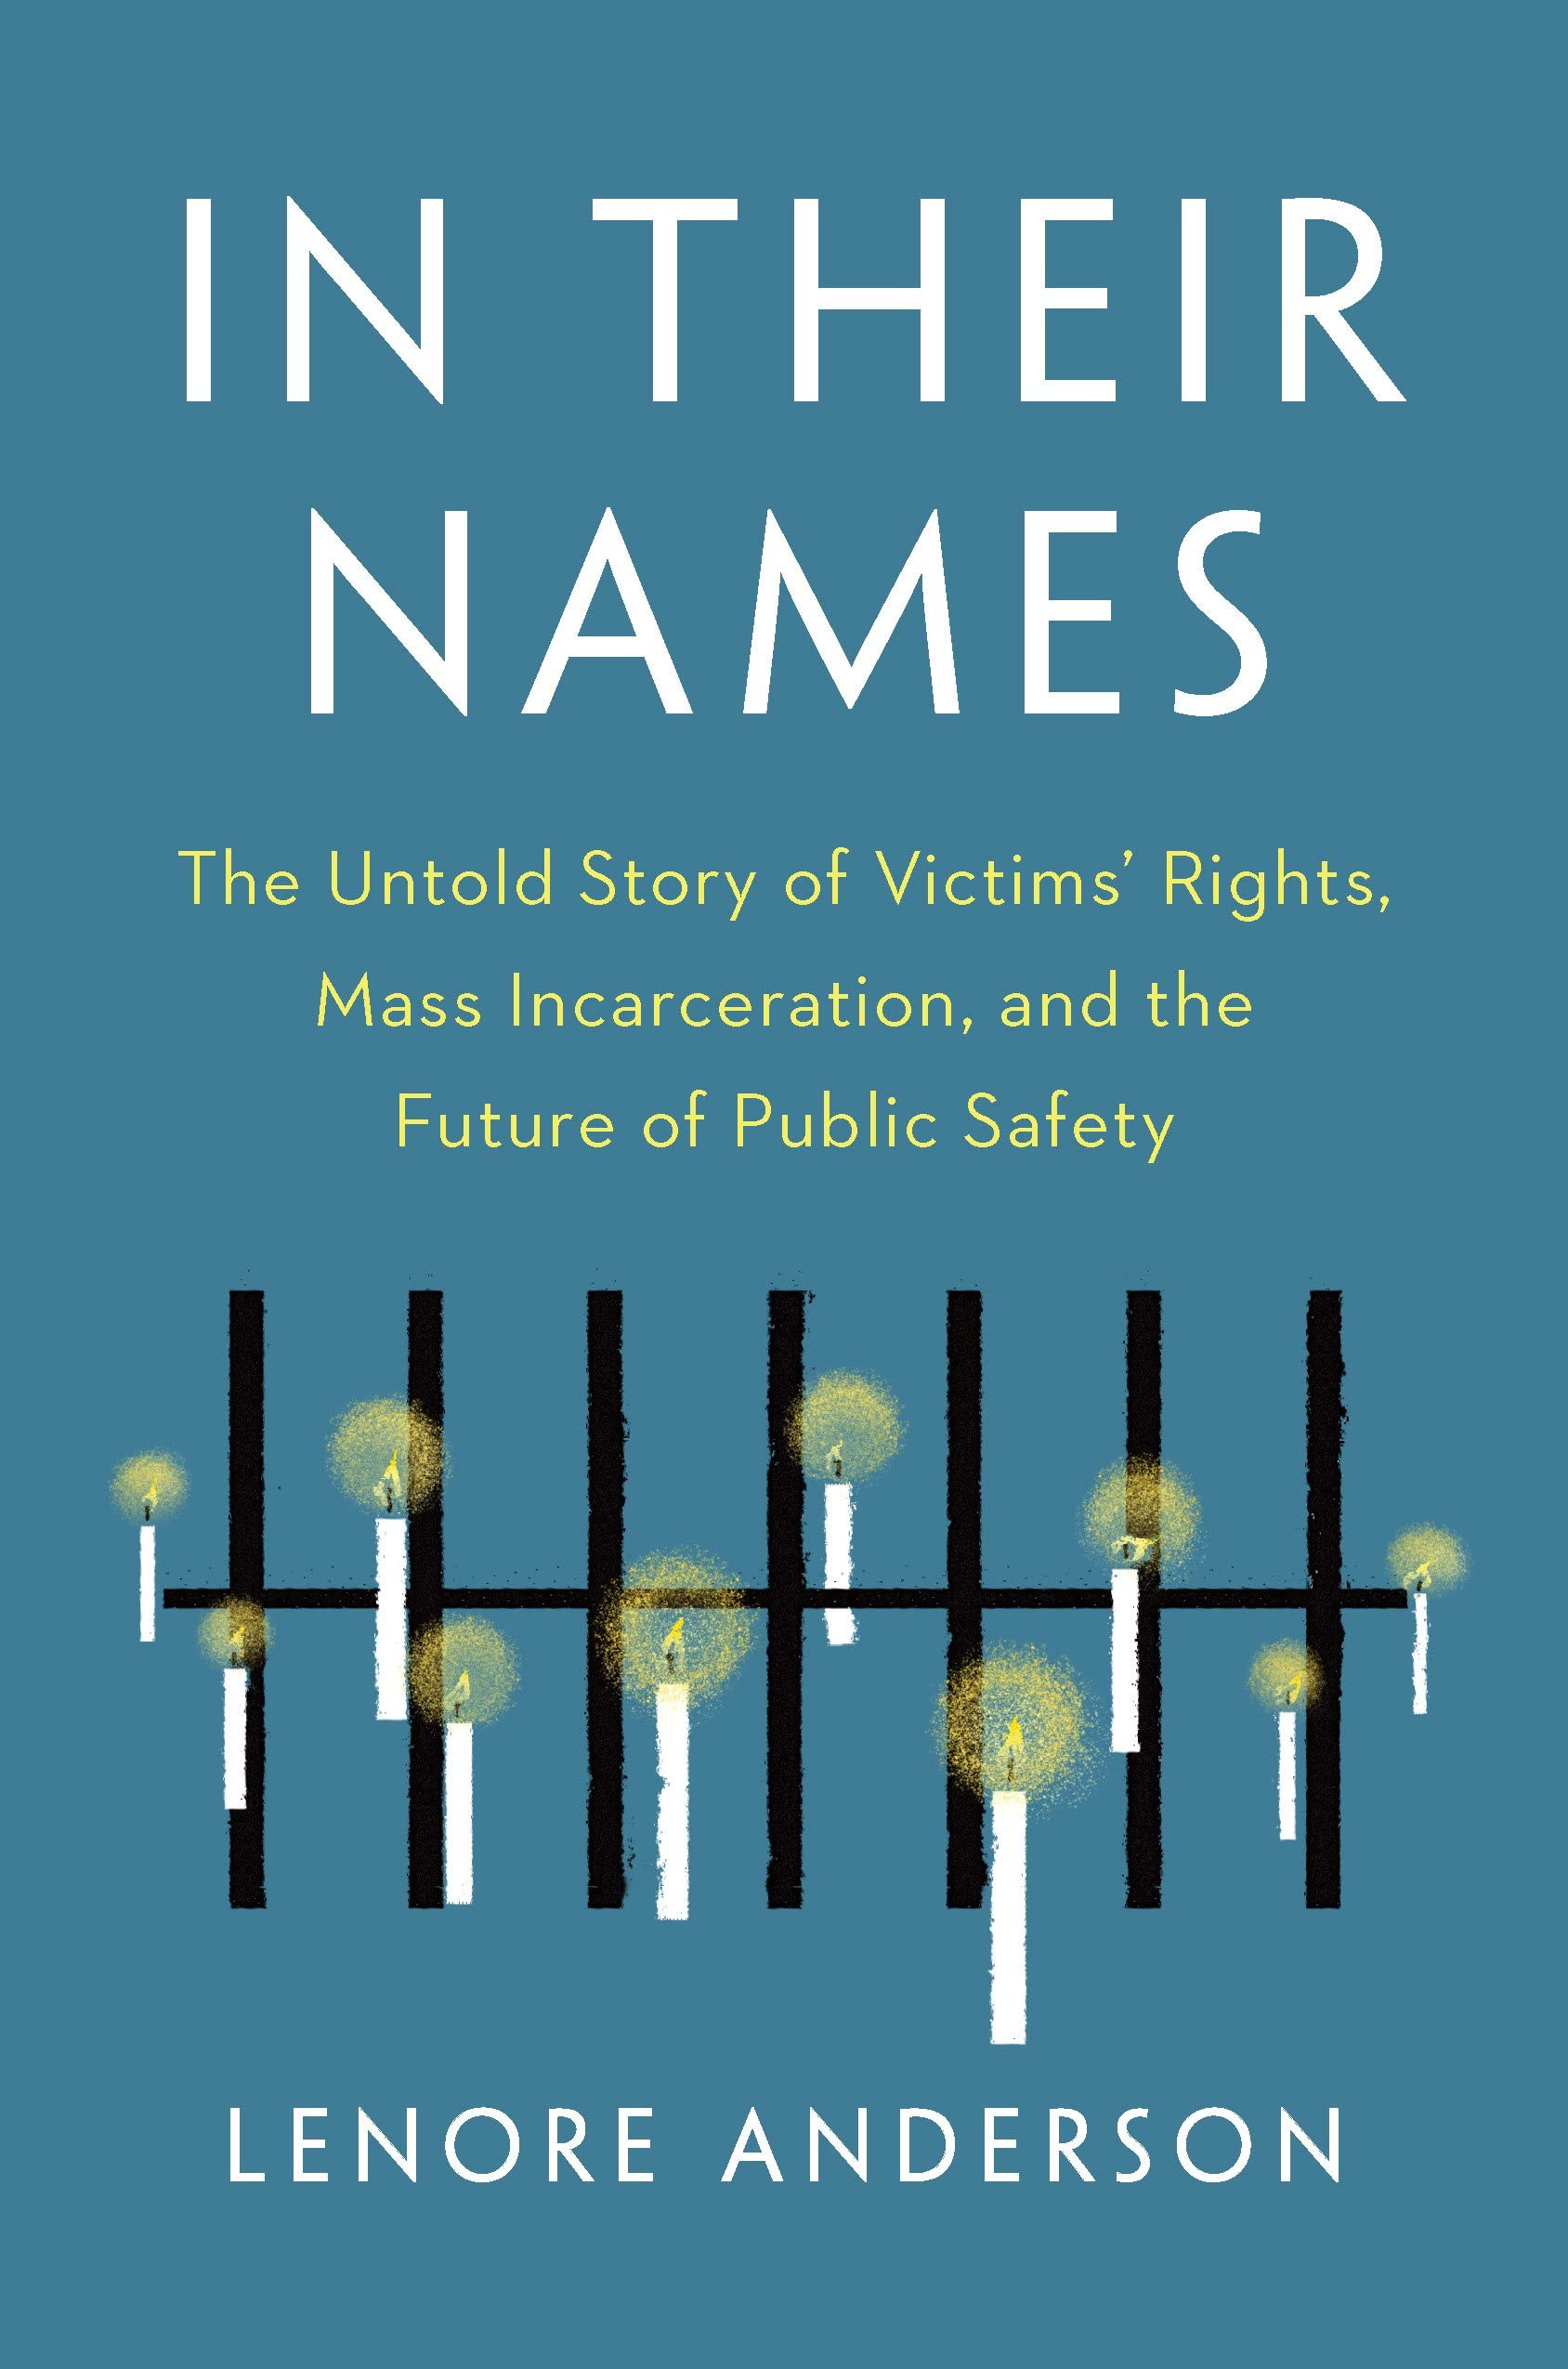 In Their Names: The Untold Story of Victims’ Rights, Mass Incarceration, and the Future of Public Safety